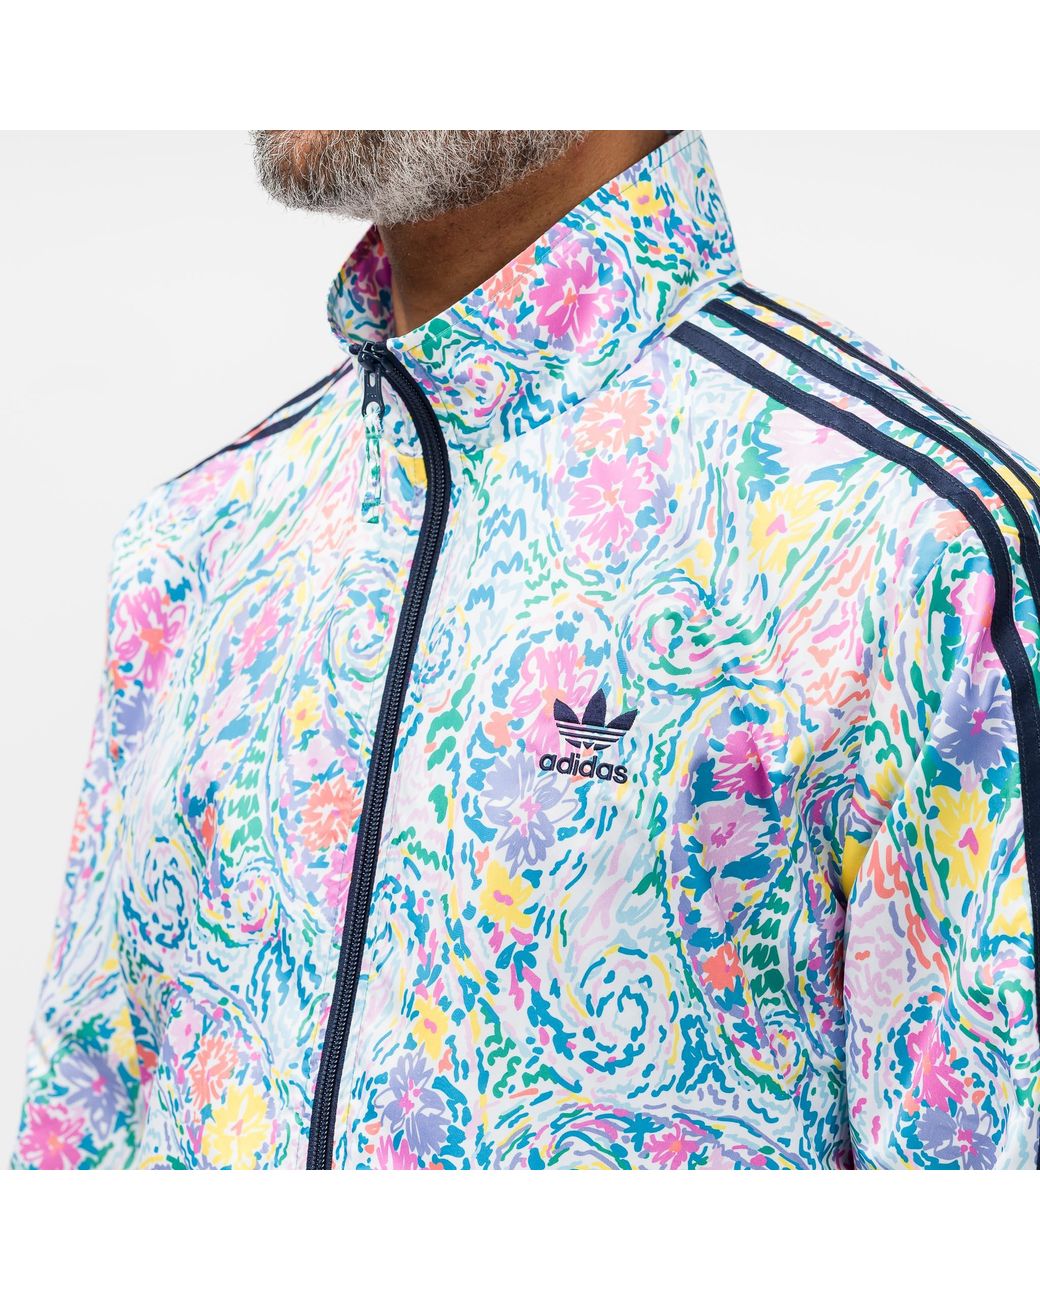 adidas Synthetic Noah Floral Jacket in Blue for Men - Lyst